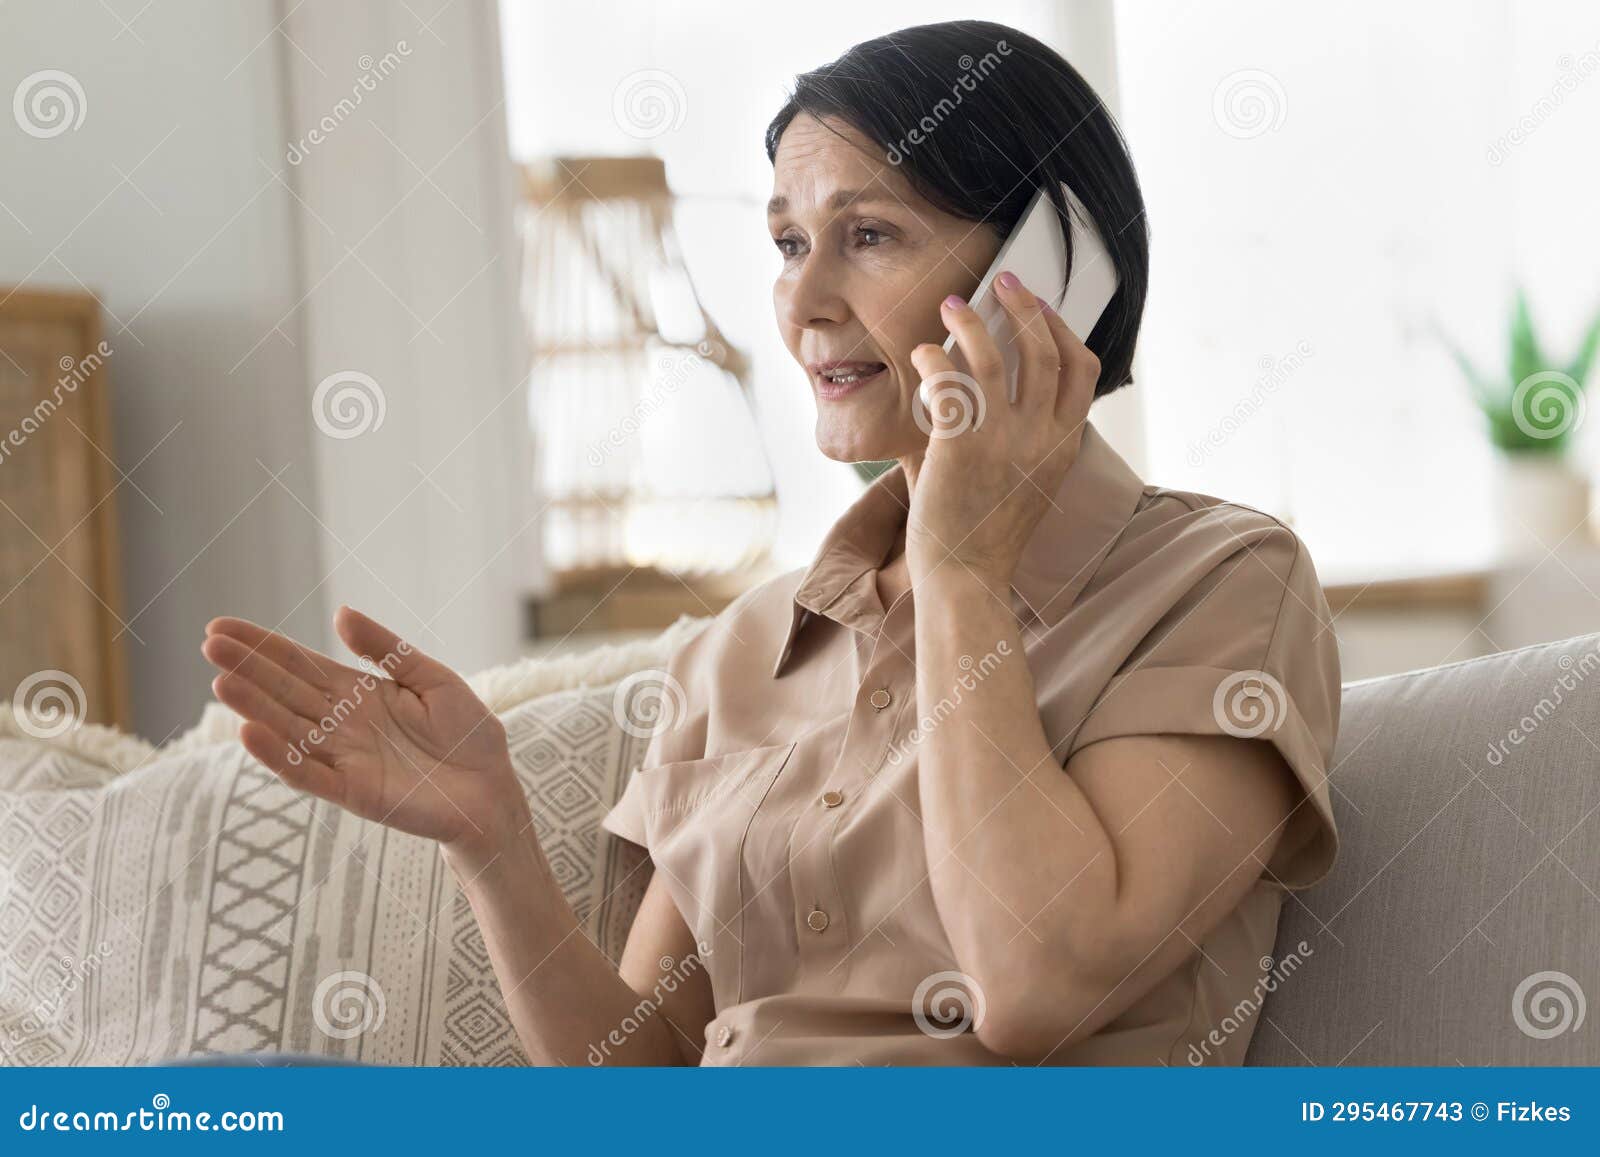 mature woman blab on cellphone seated on couch